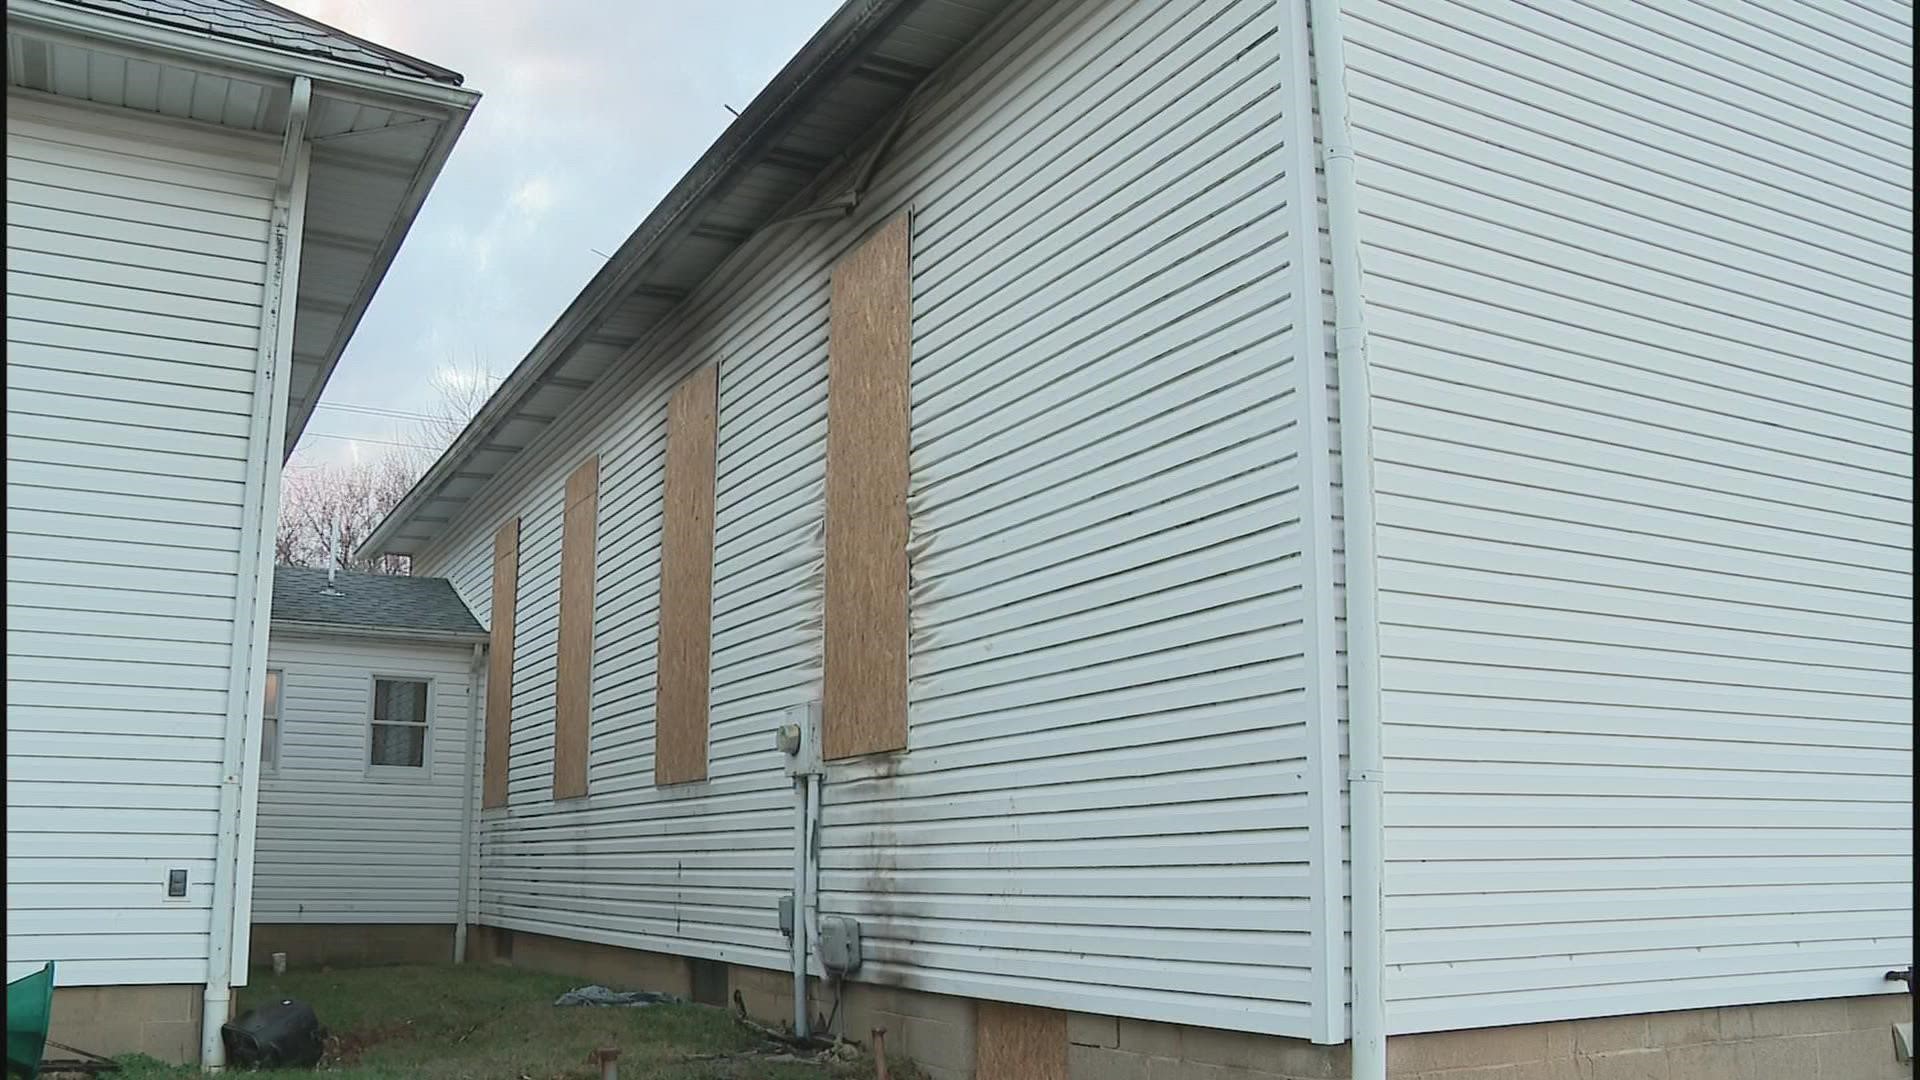 The sheriff's office said the fire happened Saturday night at Mount Zion Church. Authorities found the suspect nearly two hours after responding to the scene.